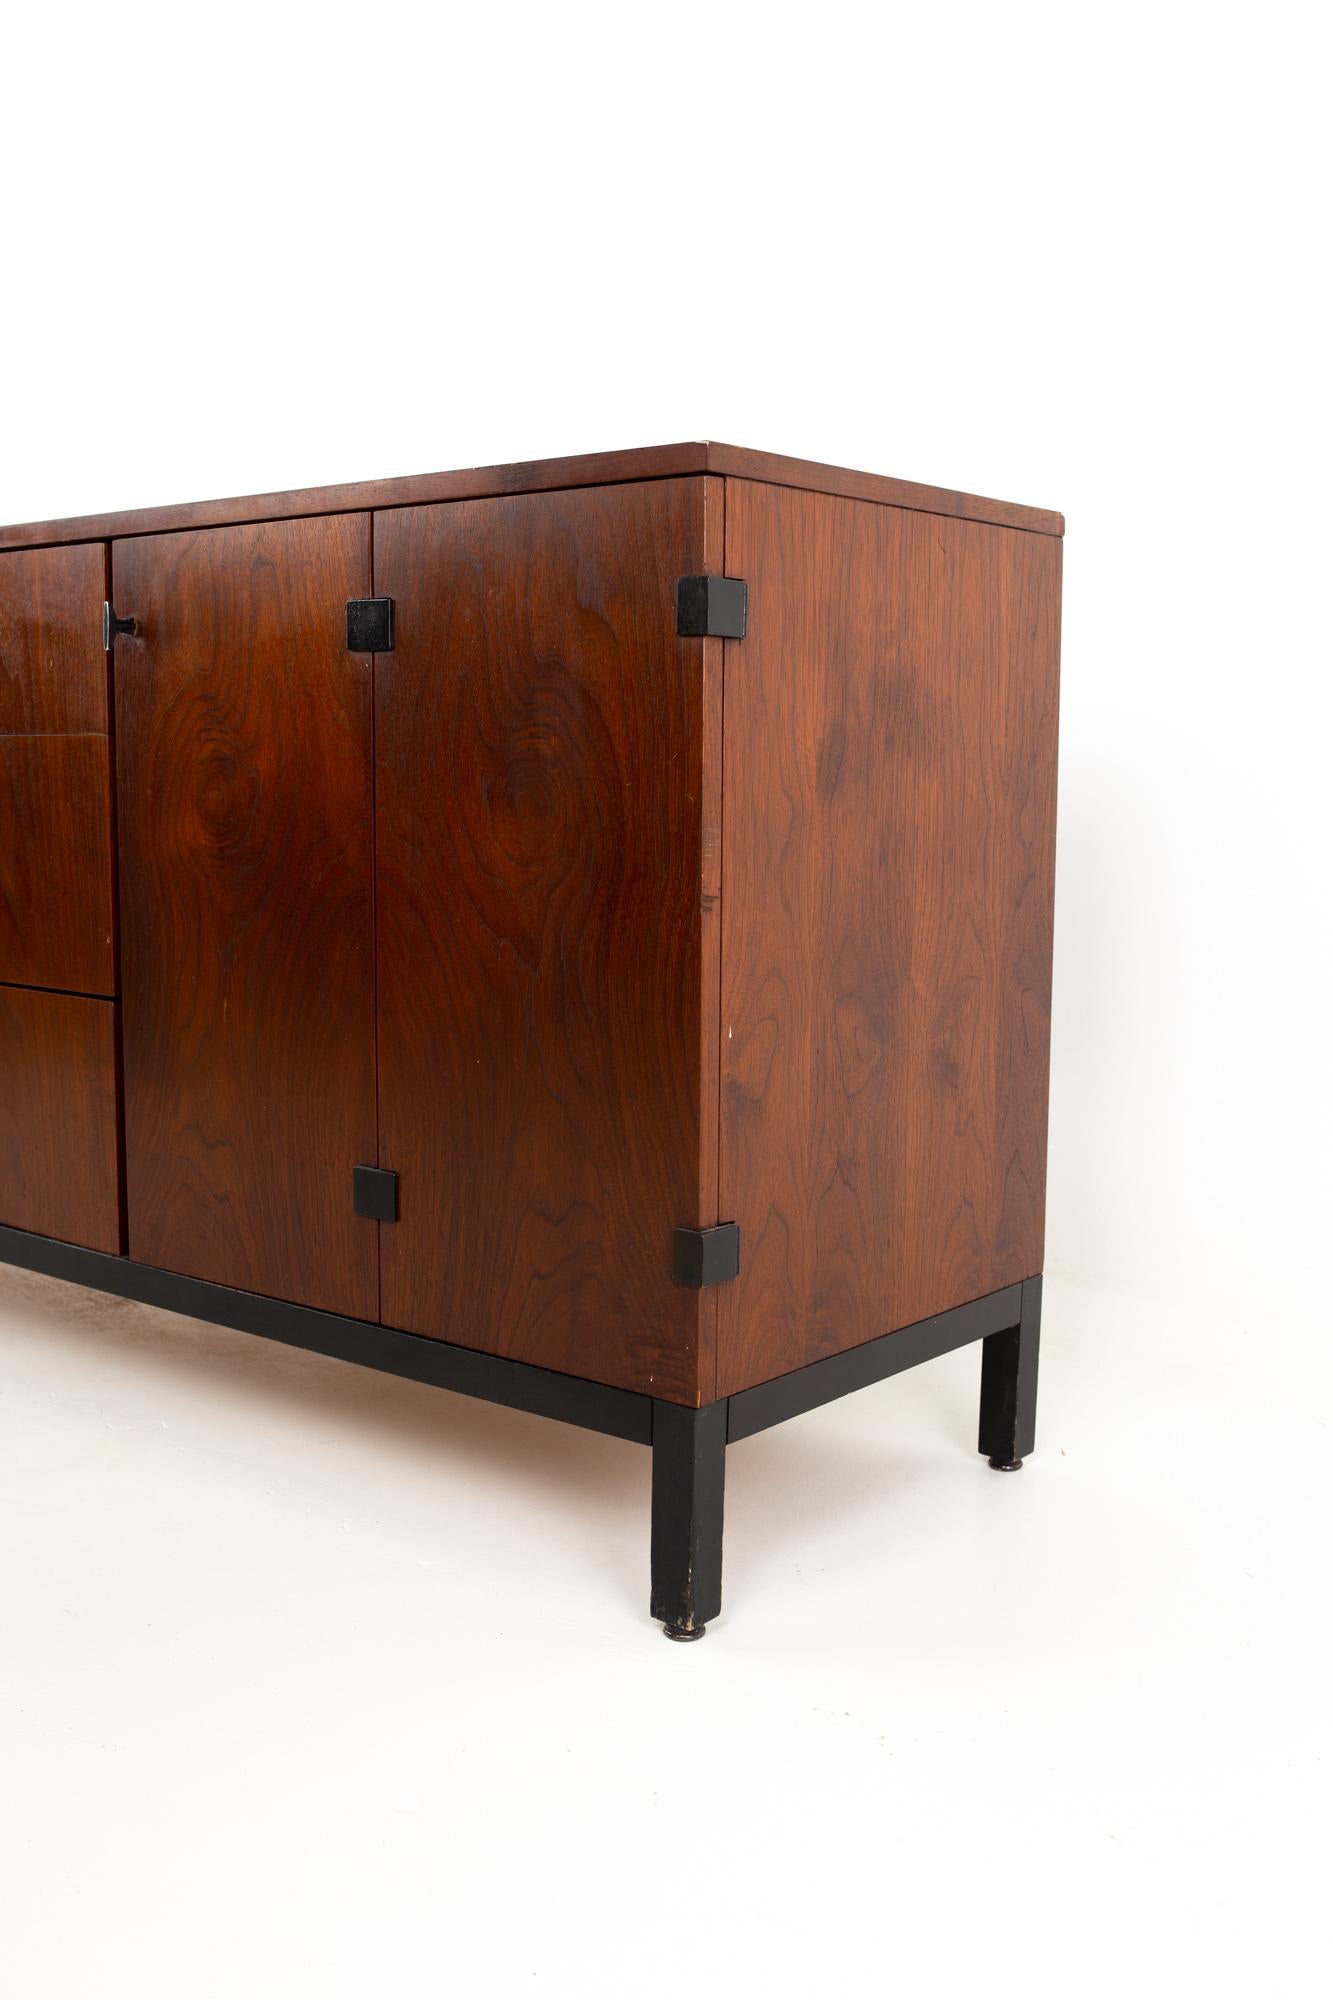 Late 20th Century Milo Baughman for Directional MCM Walnut 9-Drawer Lowboy Sideboard Credenza